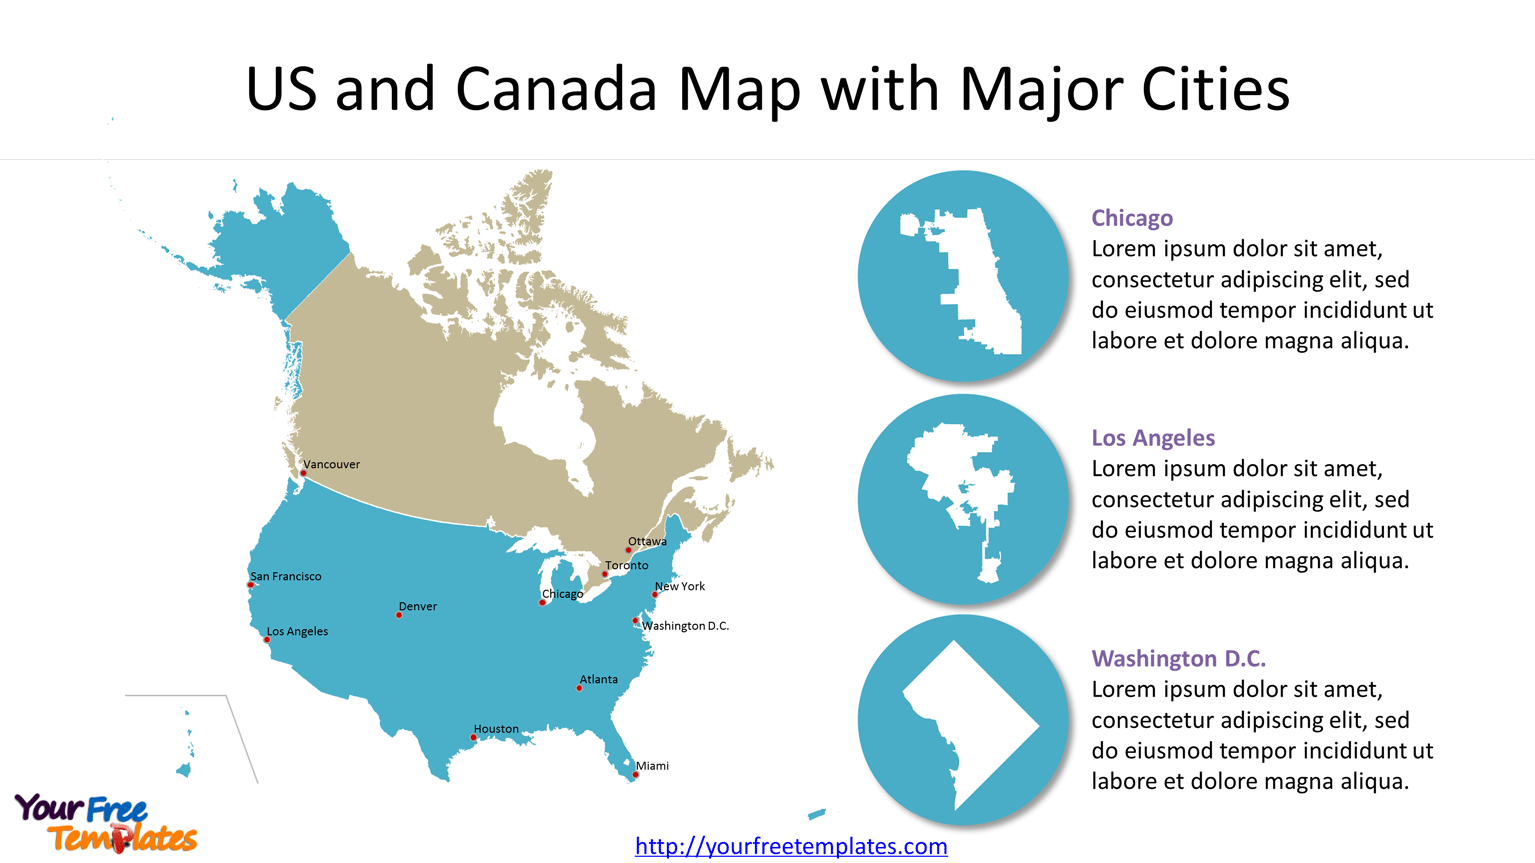 US and Canada Map of Outline